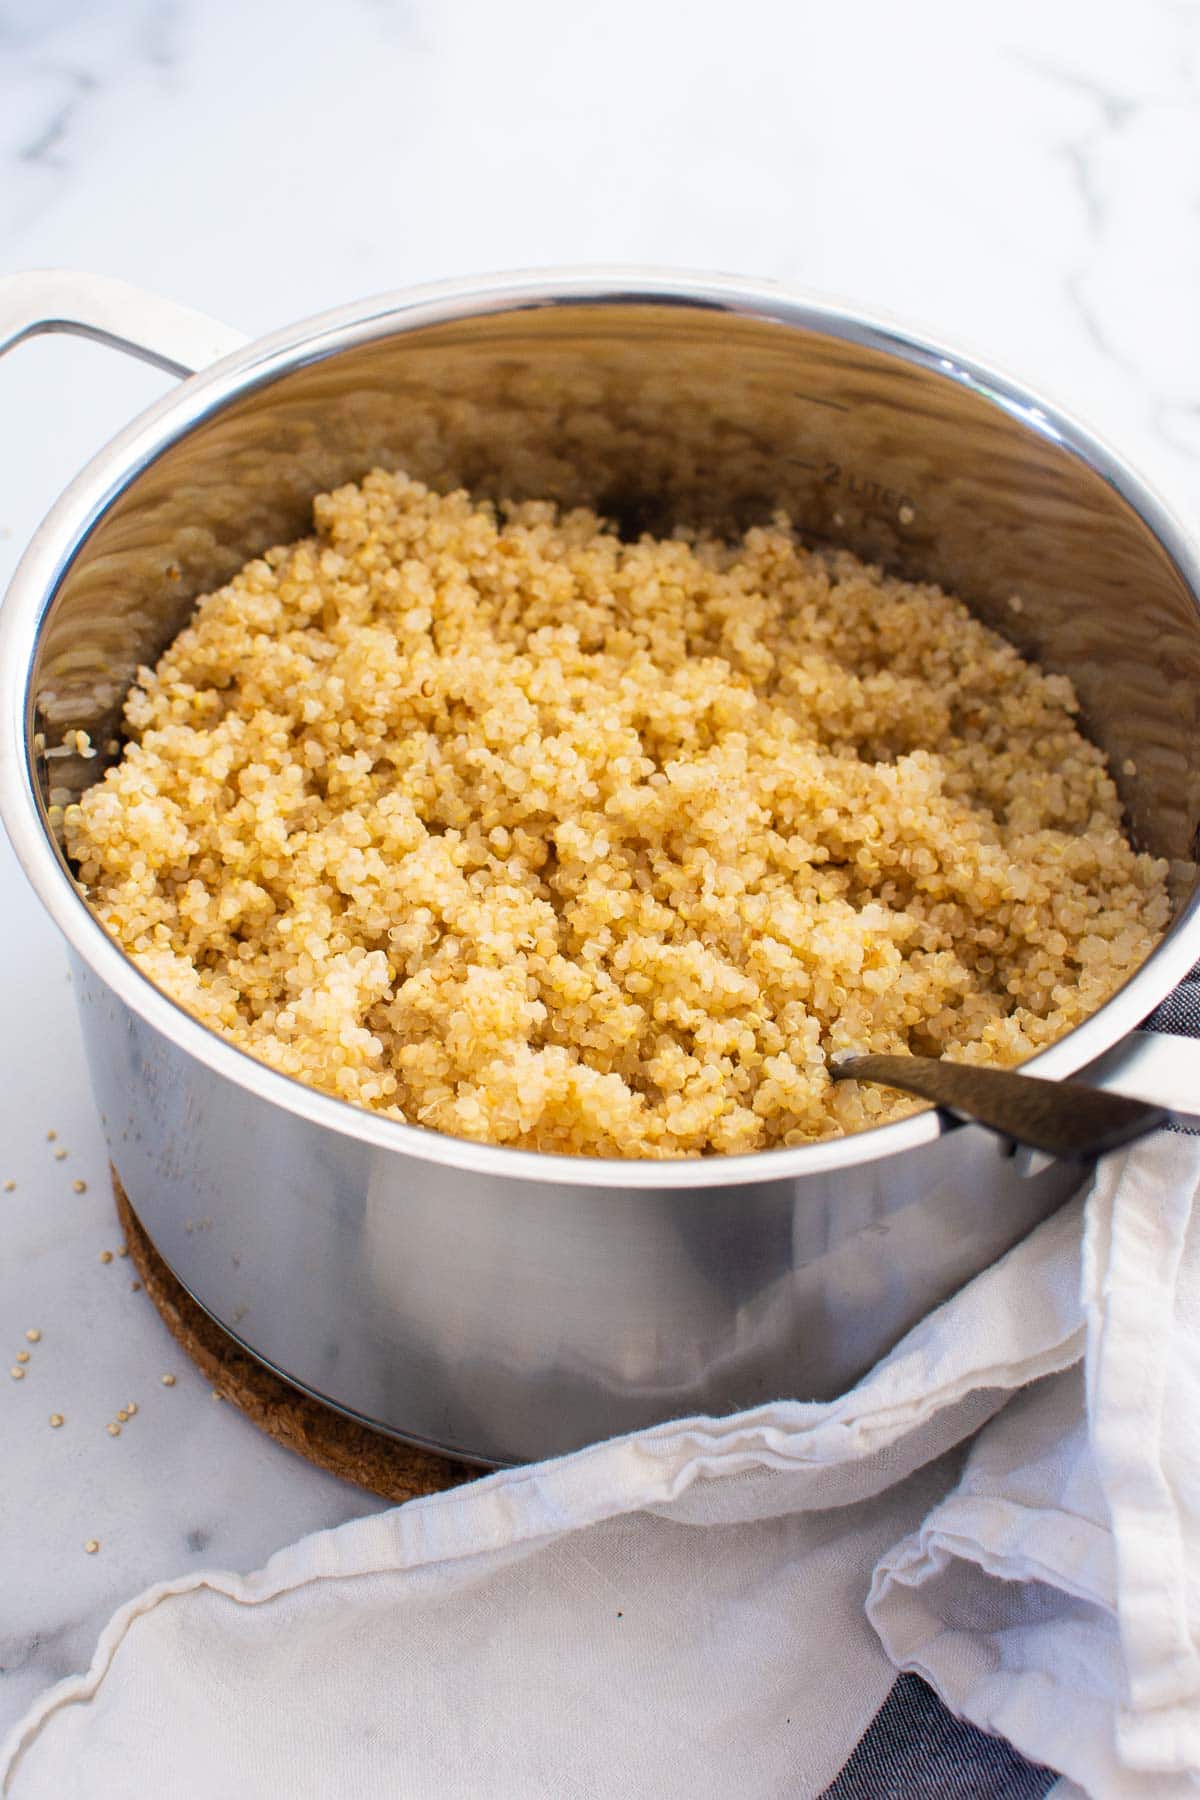 Cooked quinoa in a stove pot.